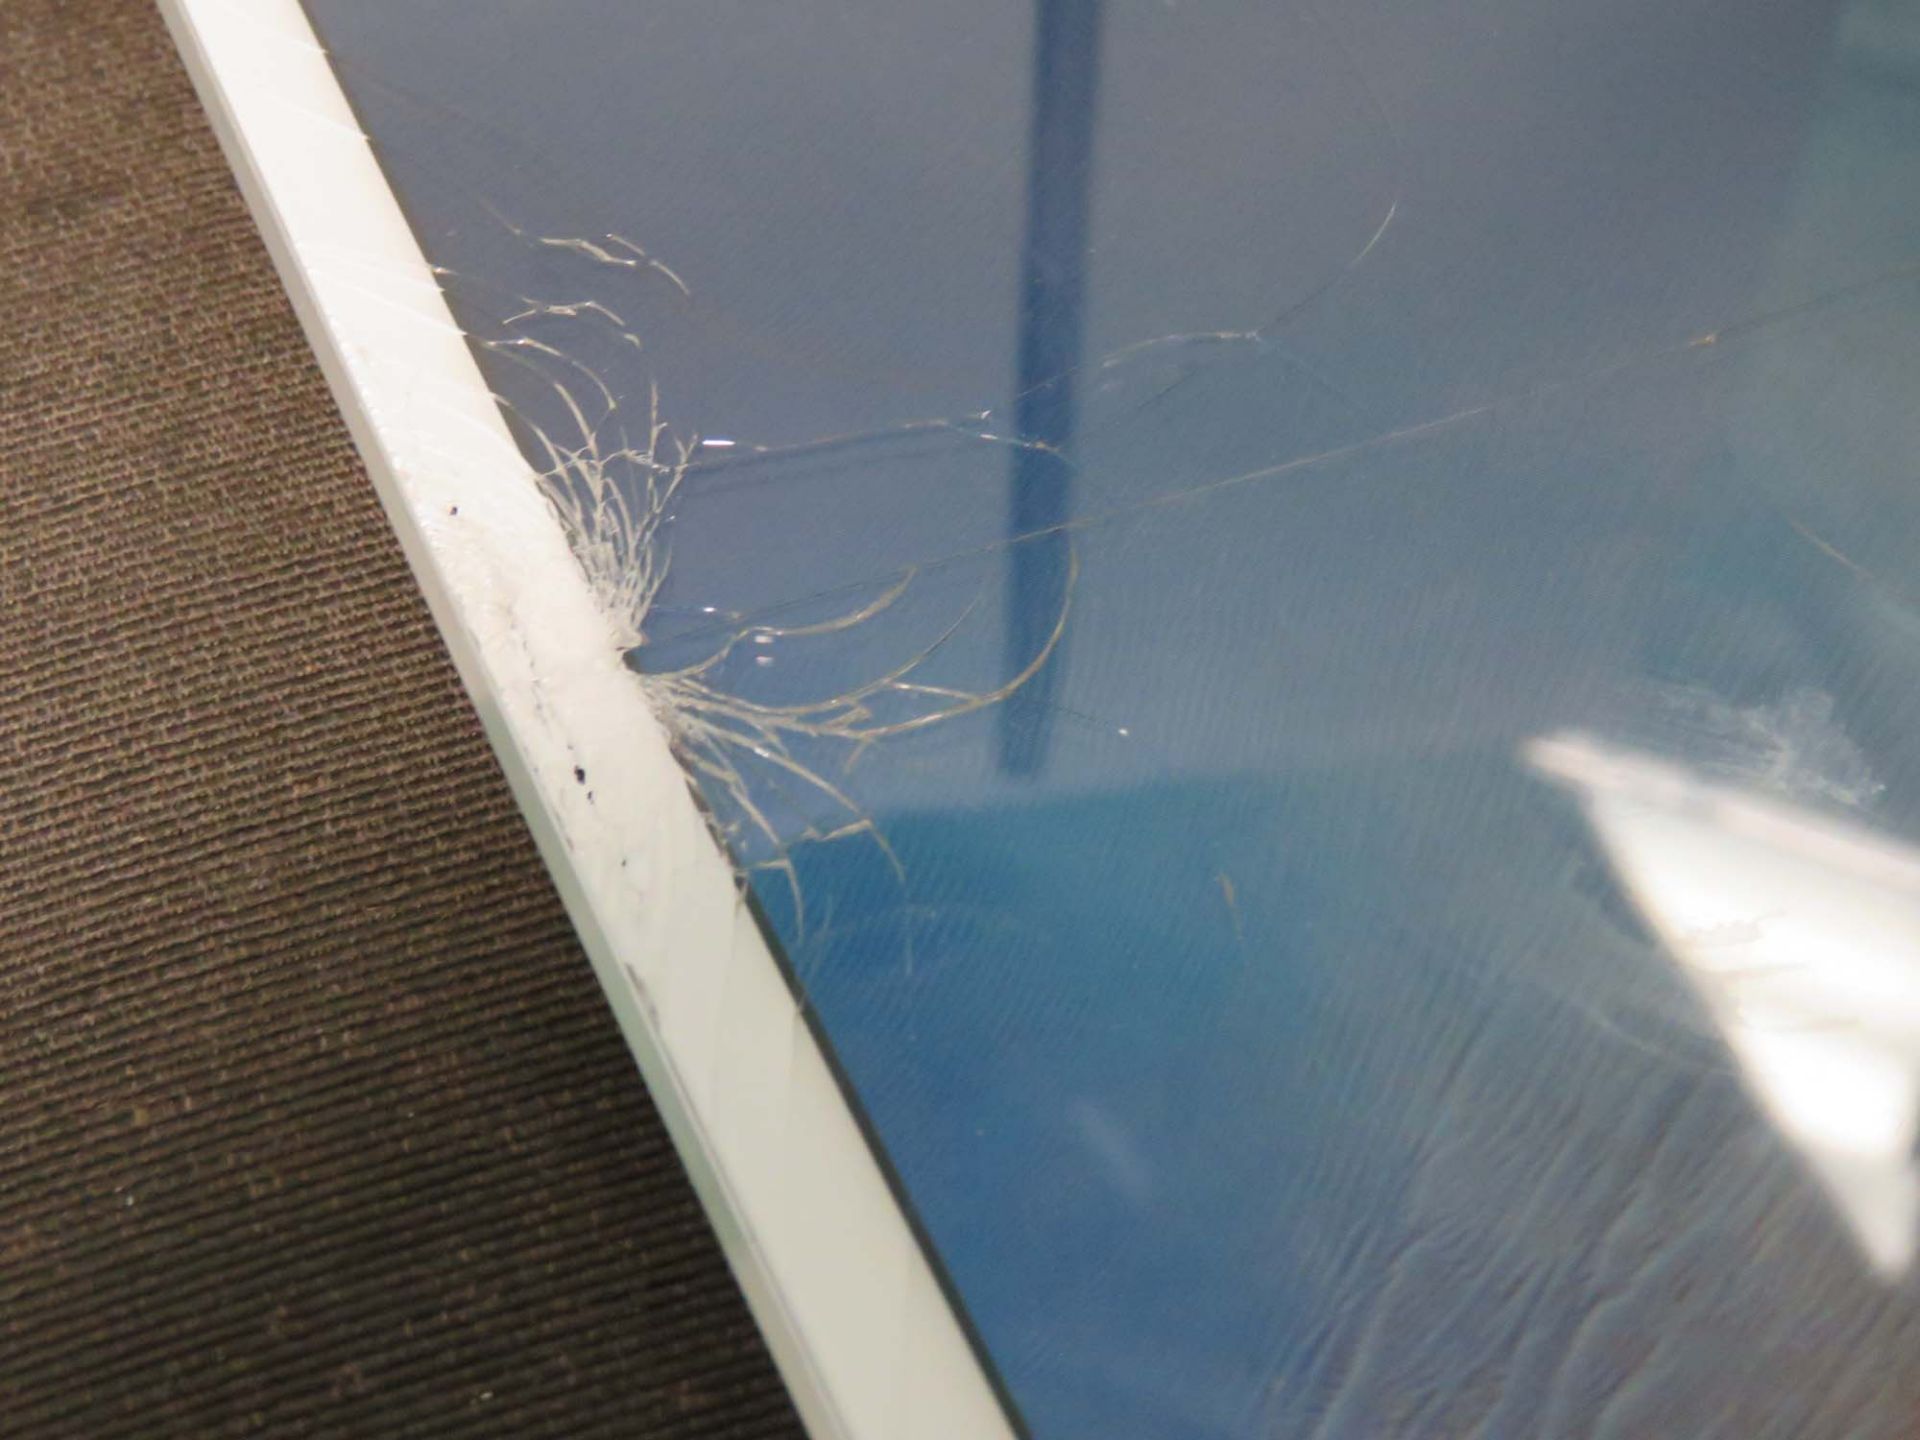 Apple iPad Mini 16gb wifi only model A1432 (cracked screen) - Image 2 of 2